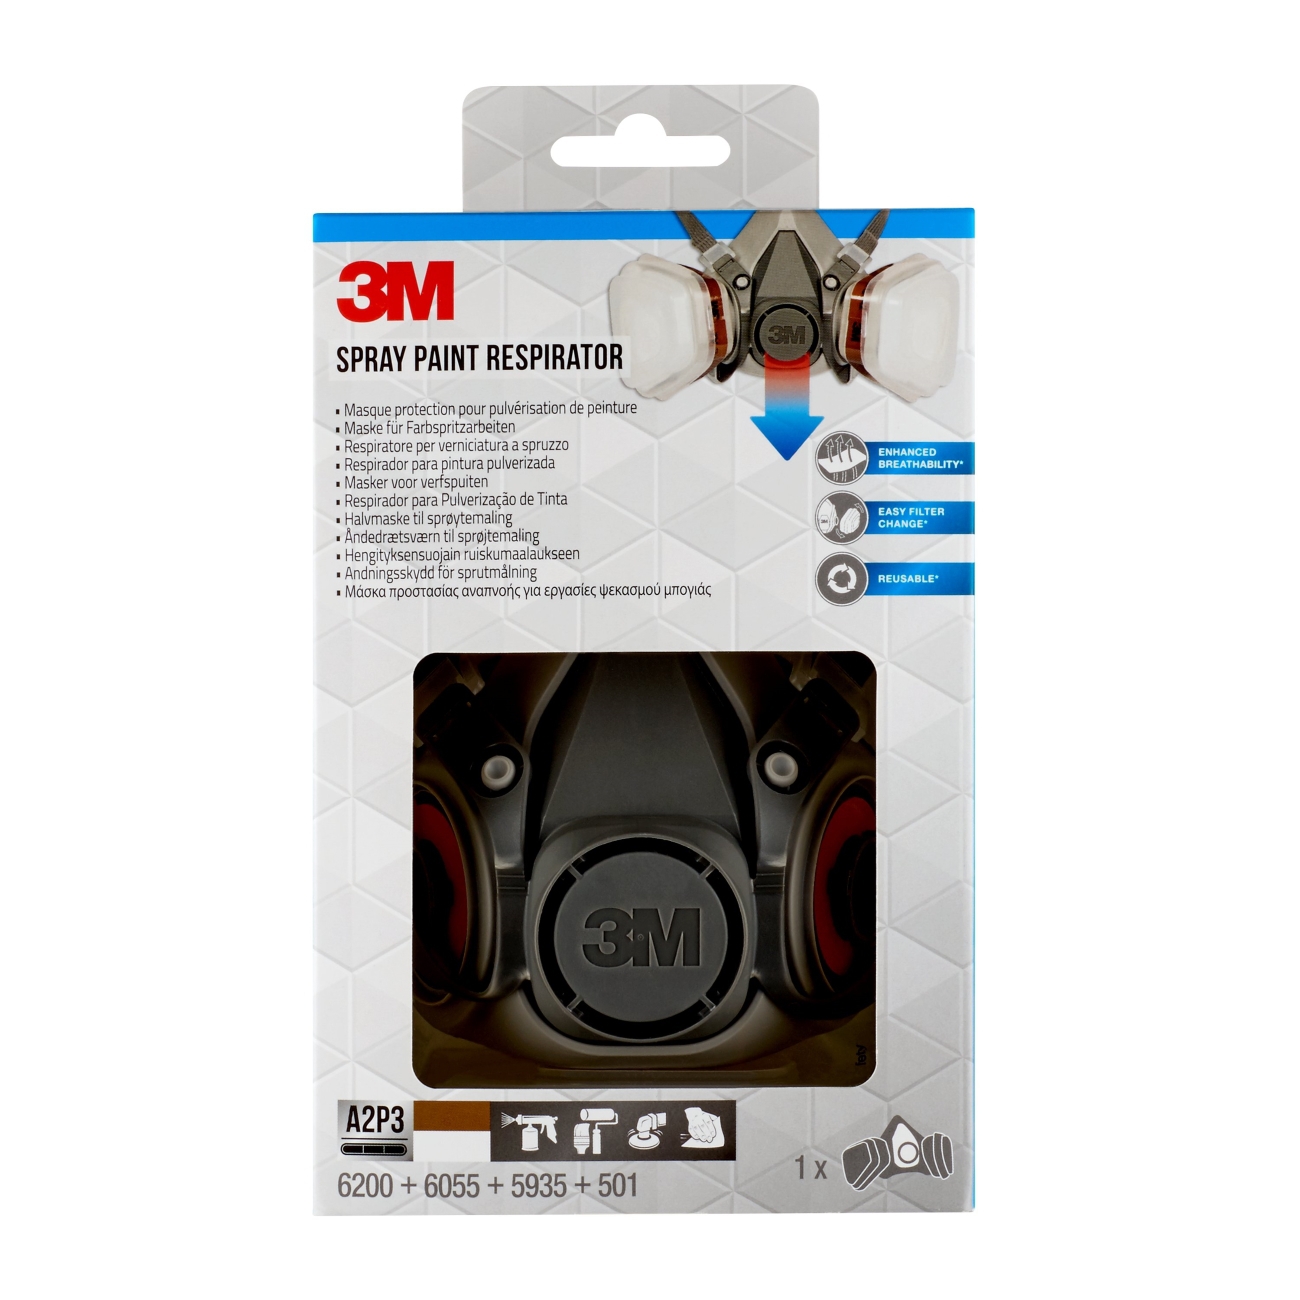 3M Mask for paint spraying 6002 1x half mask 6200M, 2x gas filter 6055, 2x particle filter 5935, 2x cover 501